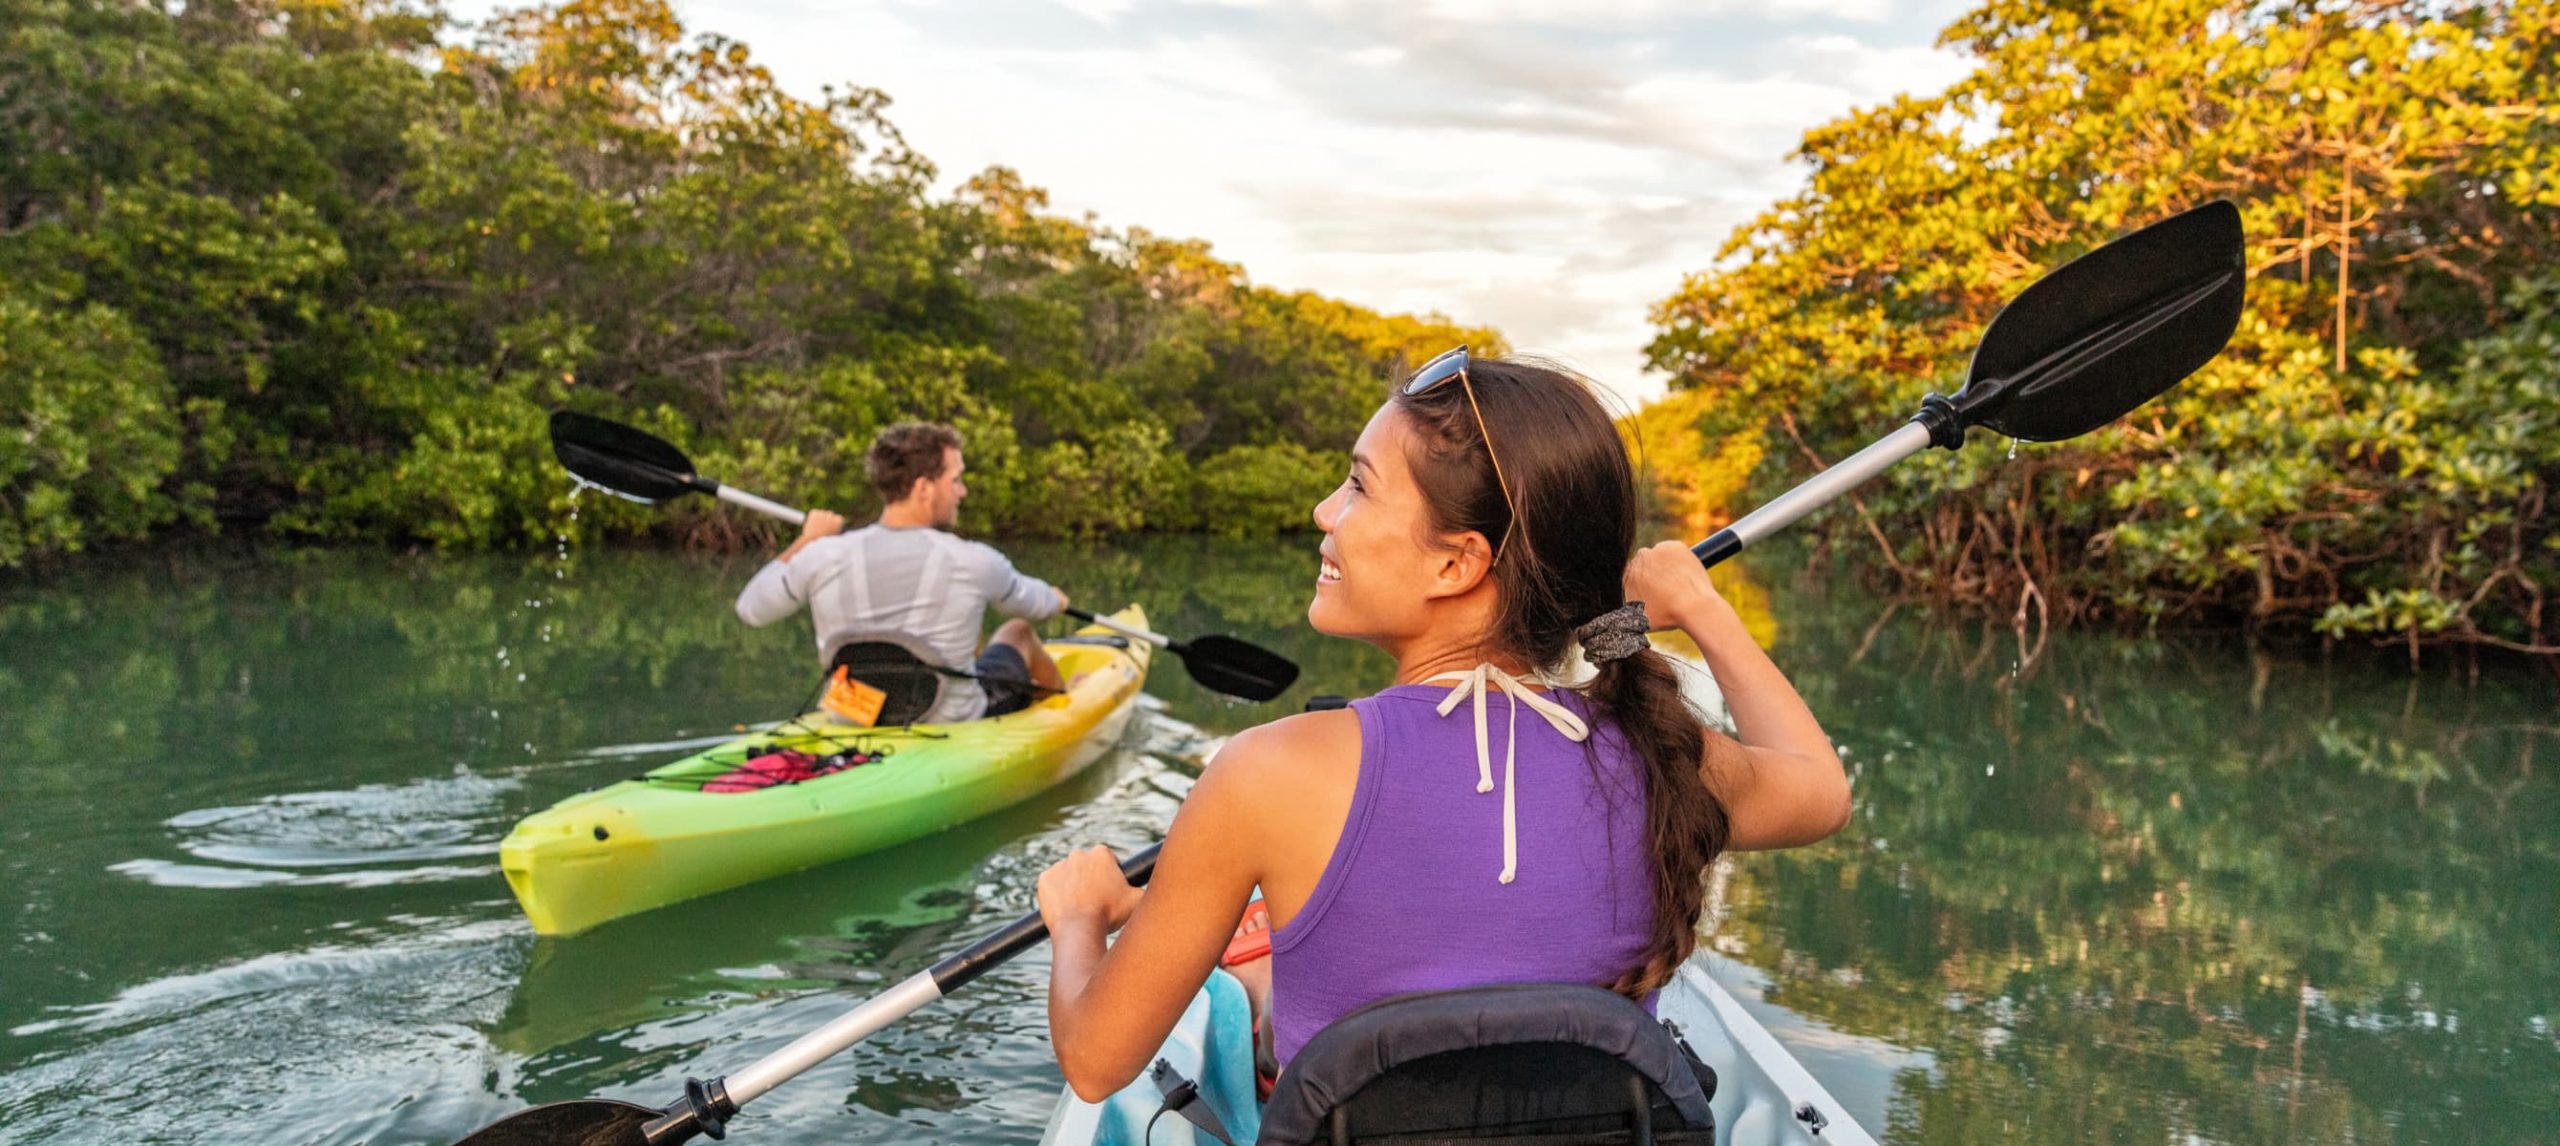 A young woman and her boyfriend happily kayaking on the Florida Everglades on separate boats.